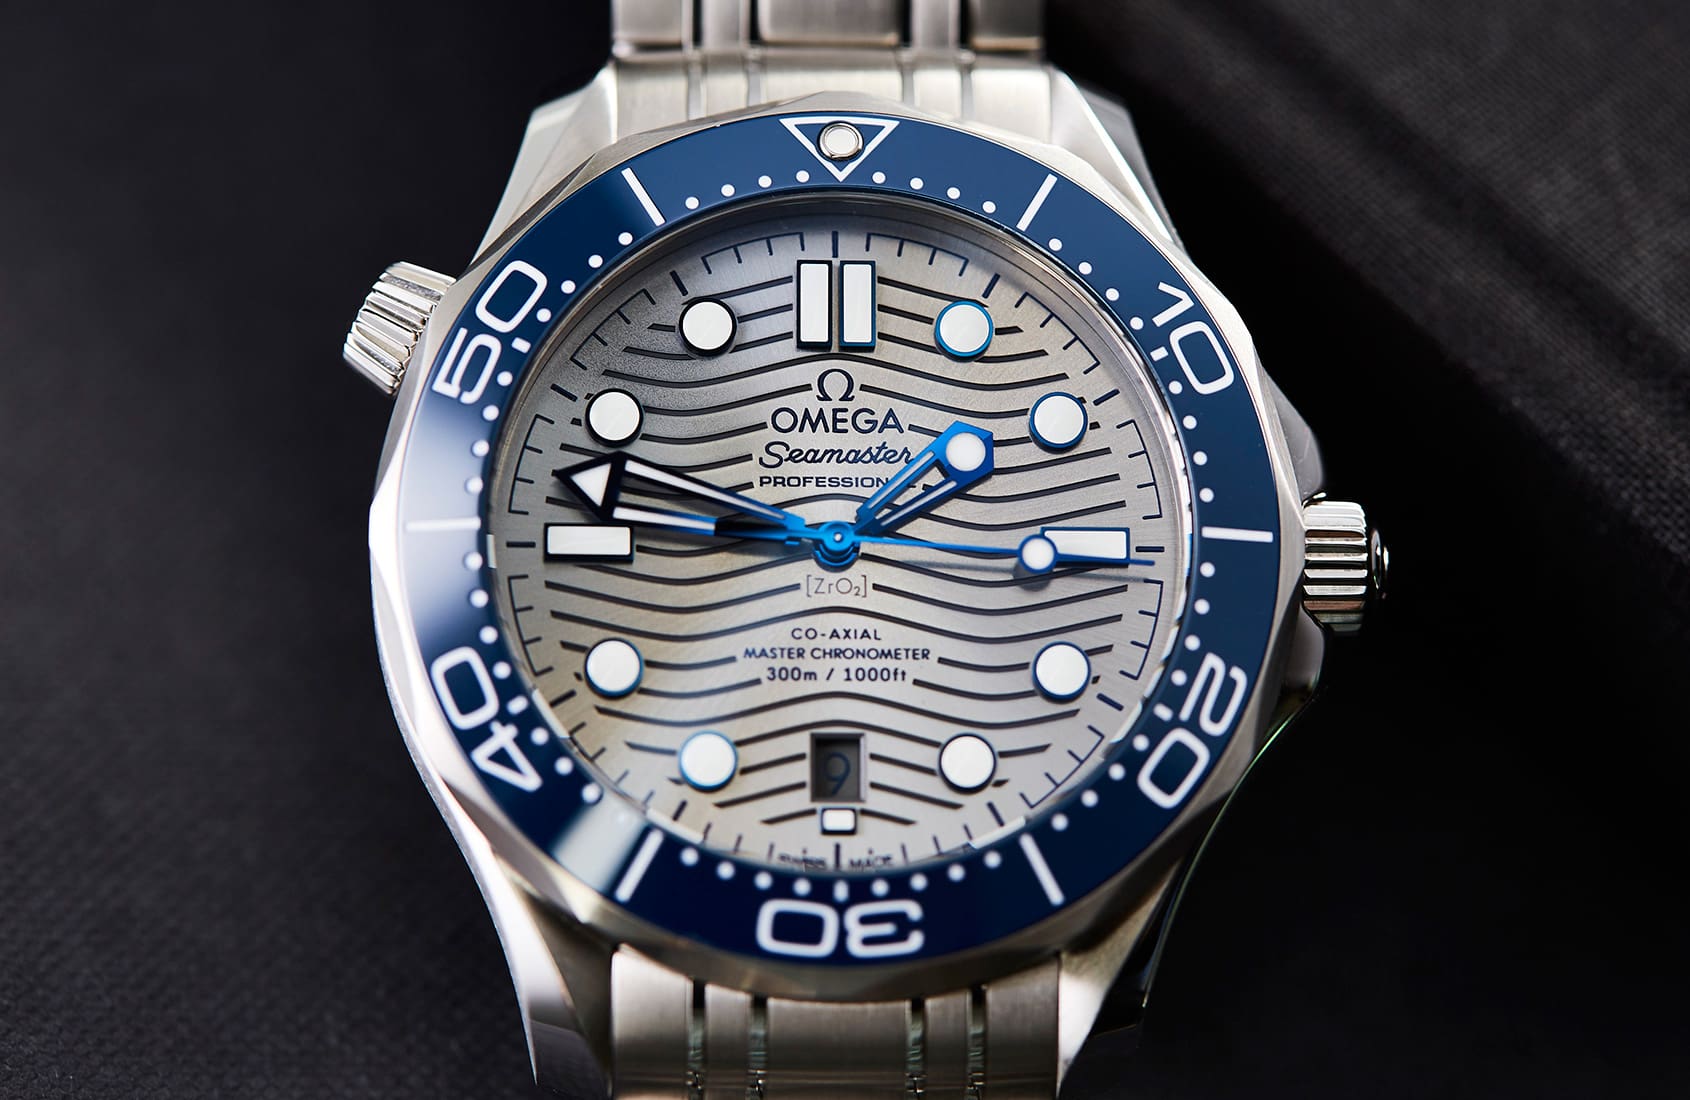 Is the Omega Seamaster Professional 300M Diver the best everyday wearer on the market right now?